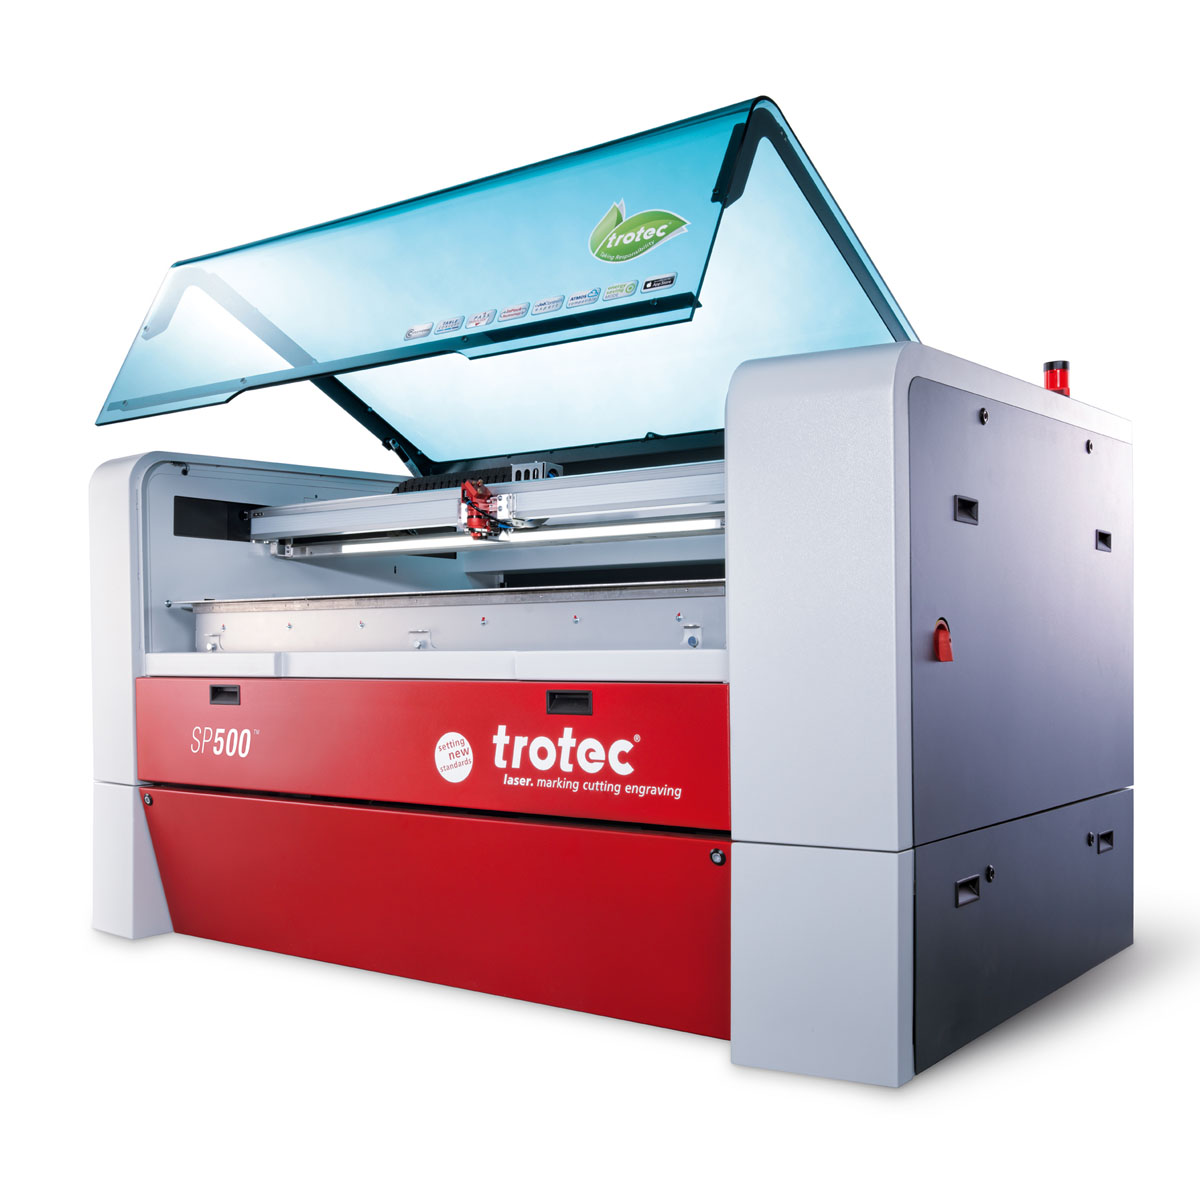 Trotec SP500 - large format CO2 engraving and cutting laser